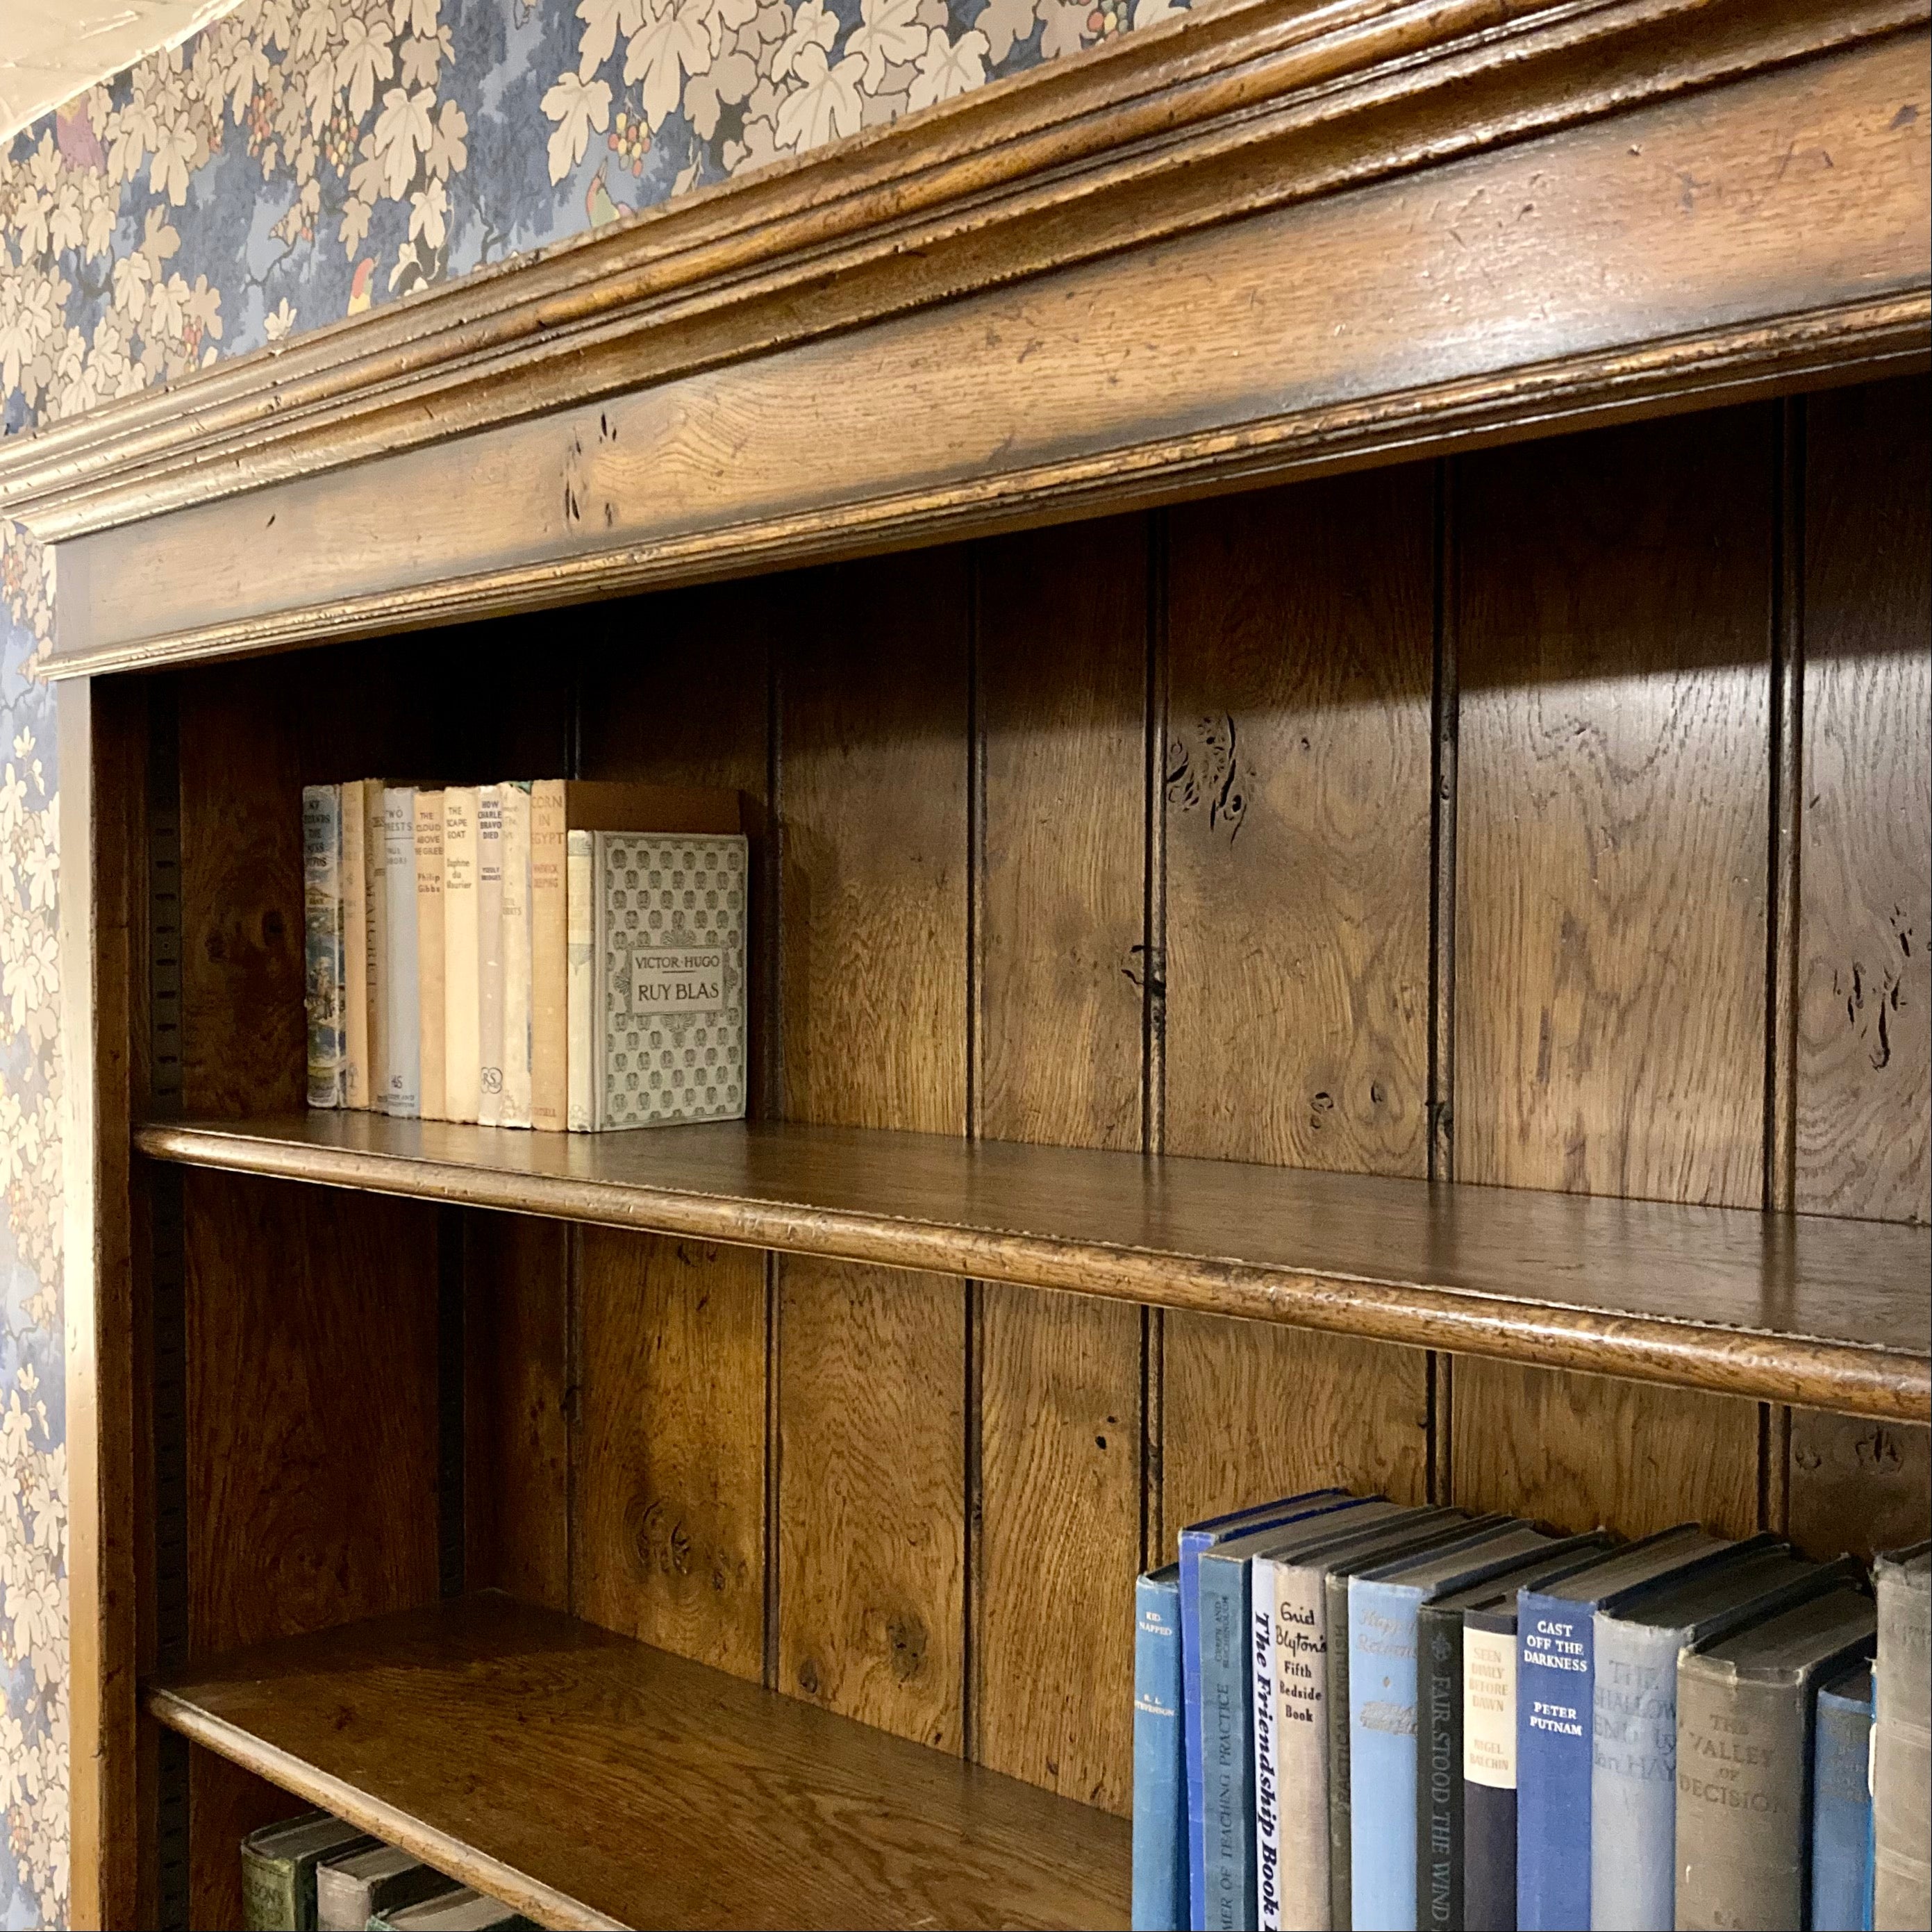 Canterbury Open Bookcase - Large